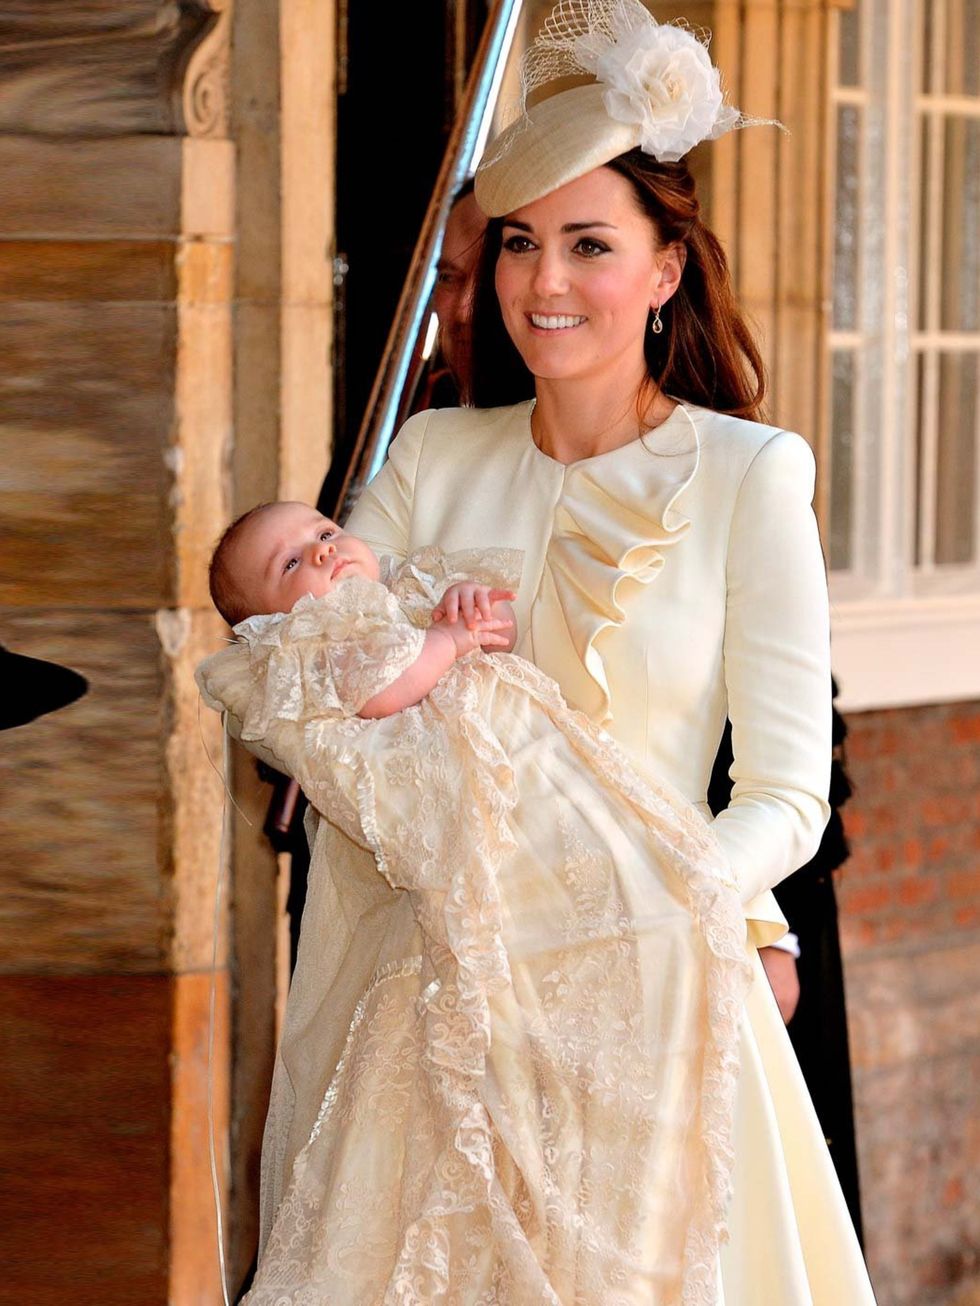 <p><a href="http://www.elleuk.com/star-style/celebrity-style-files/kate-middleton-s-style-file">Catherine, Duchess of Cambridge</a> carries her son Prince George of Cambridge after his christening at the Chapel Royal in St James's Palace, London, October 